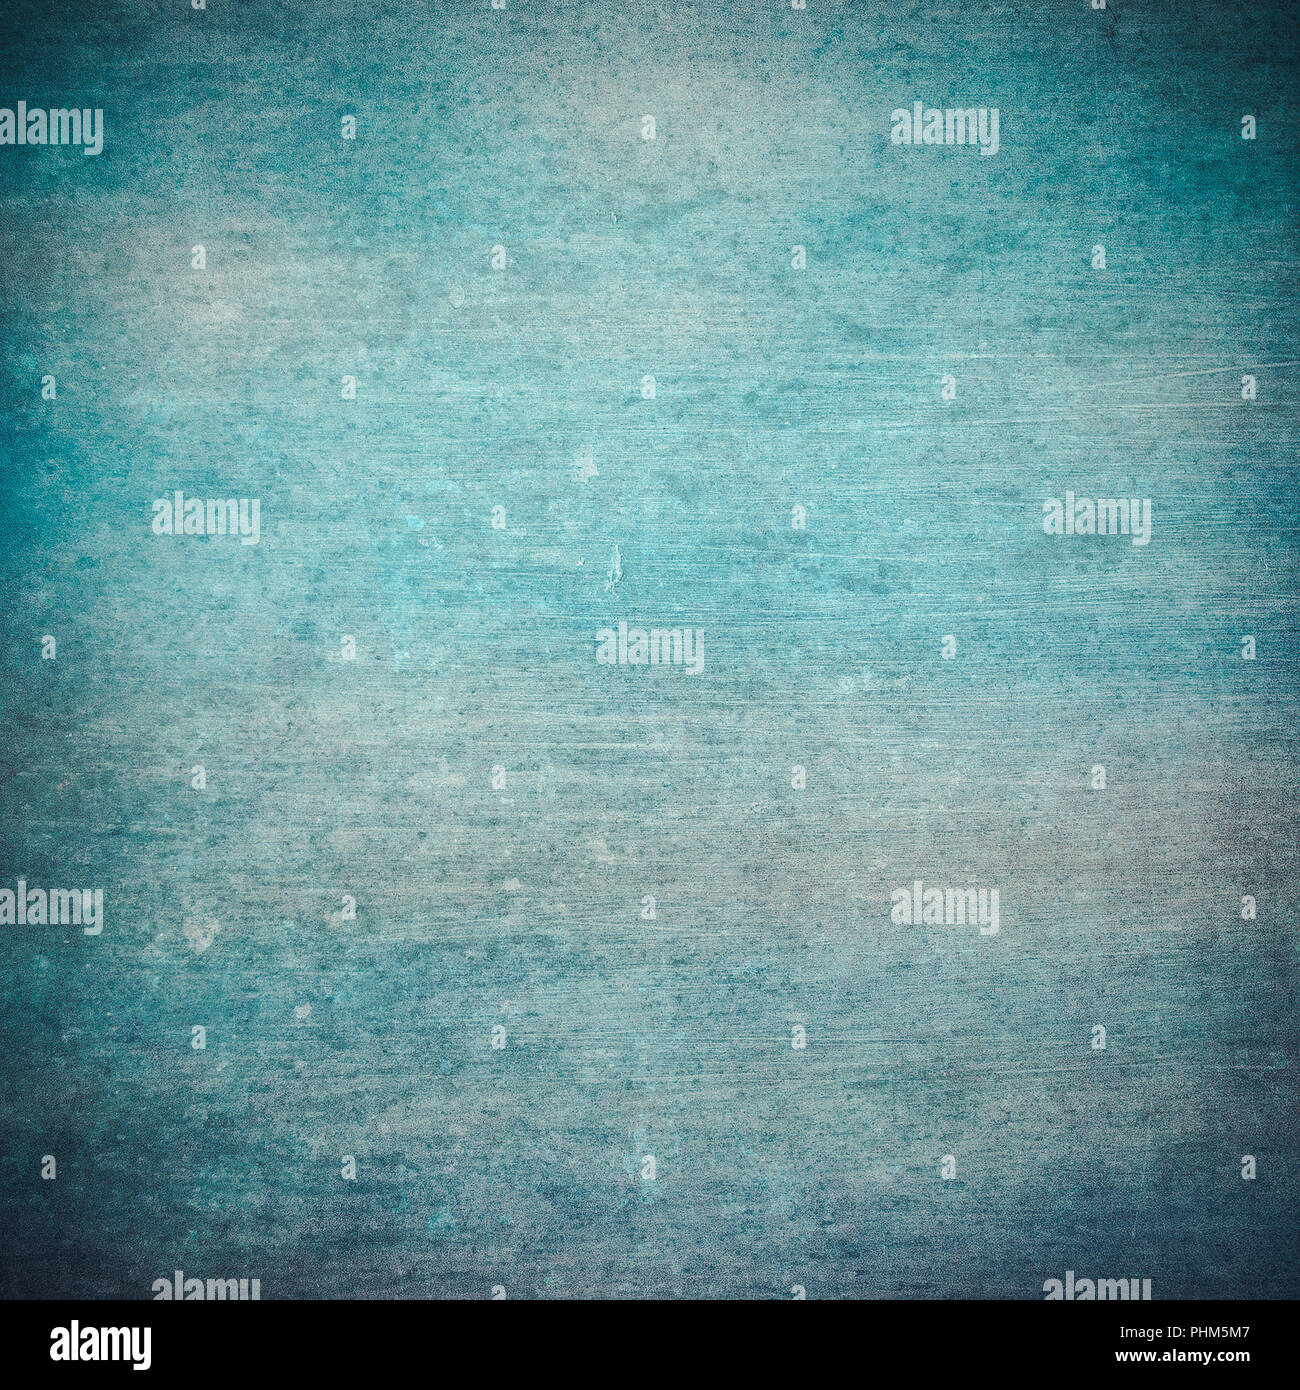 grunge textured background with space for text or image Stock Photo